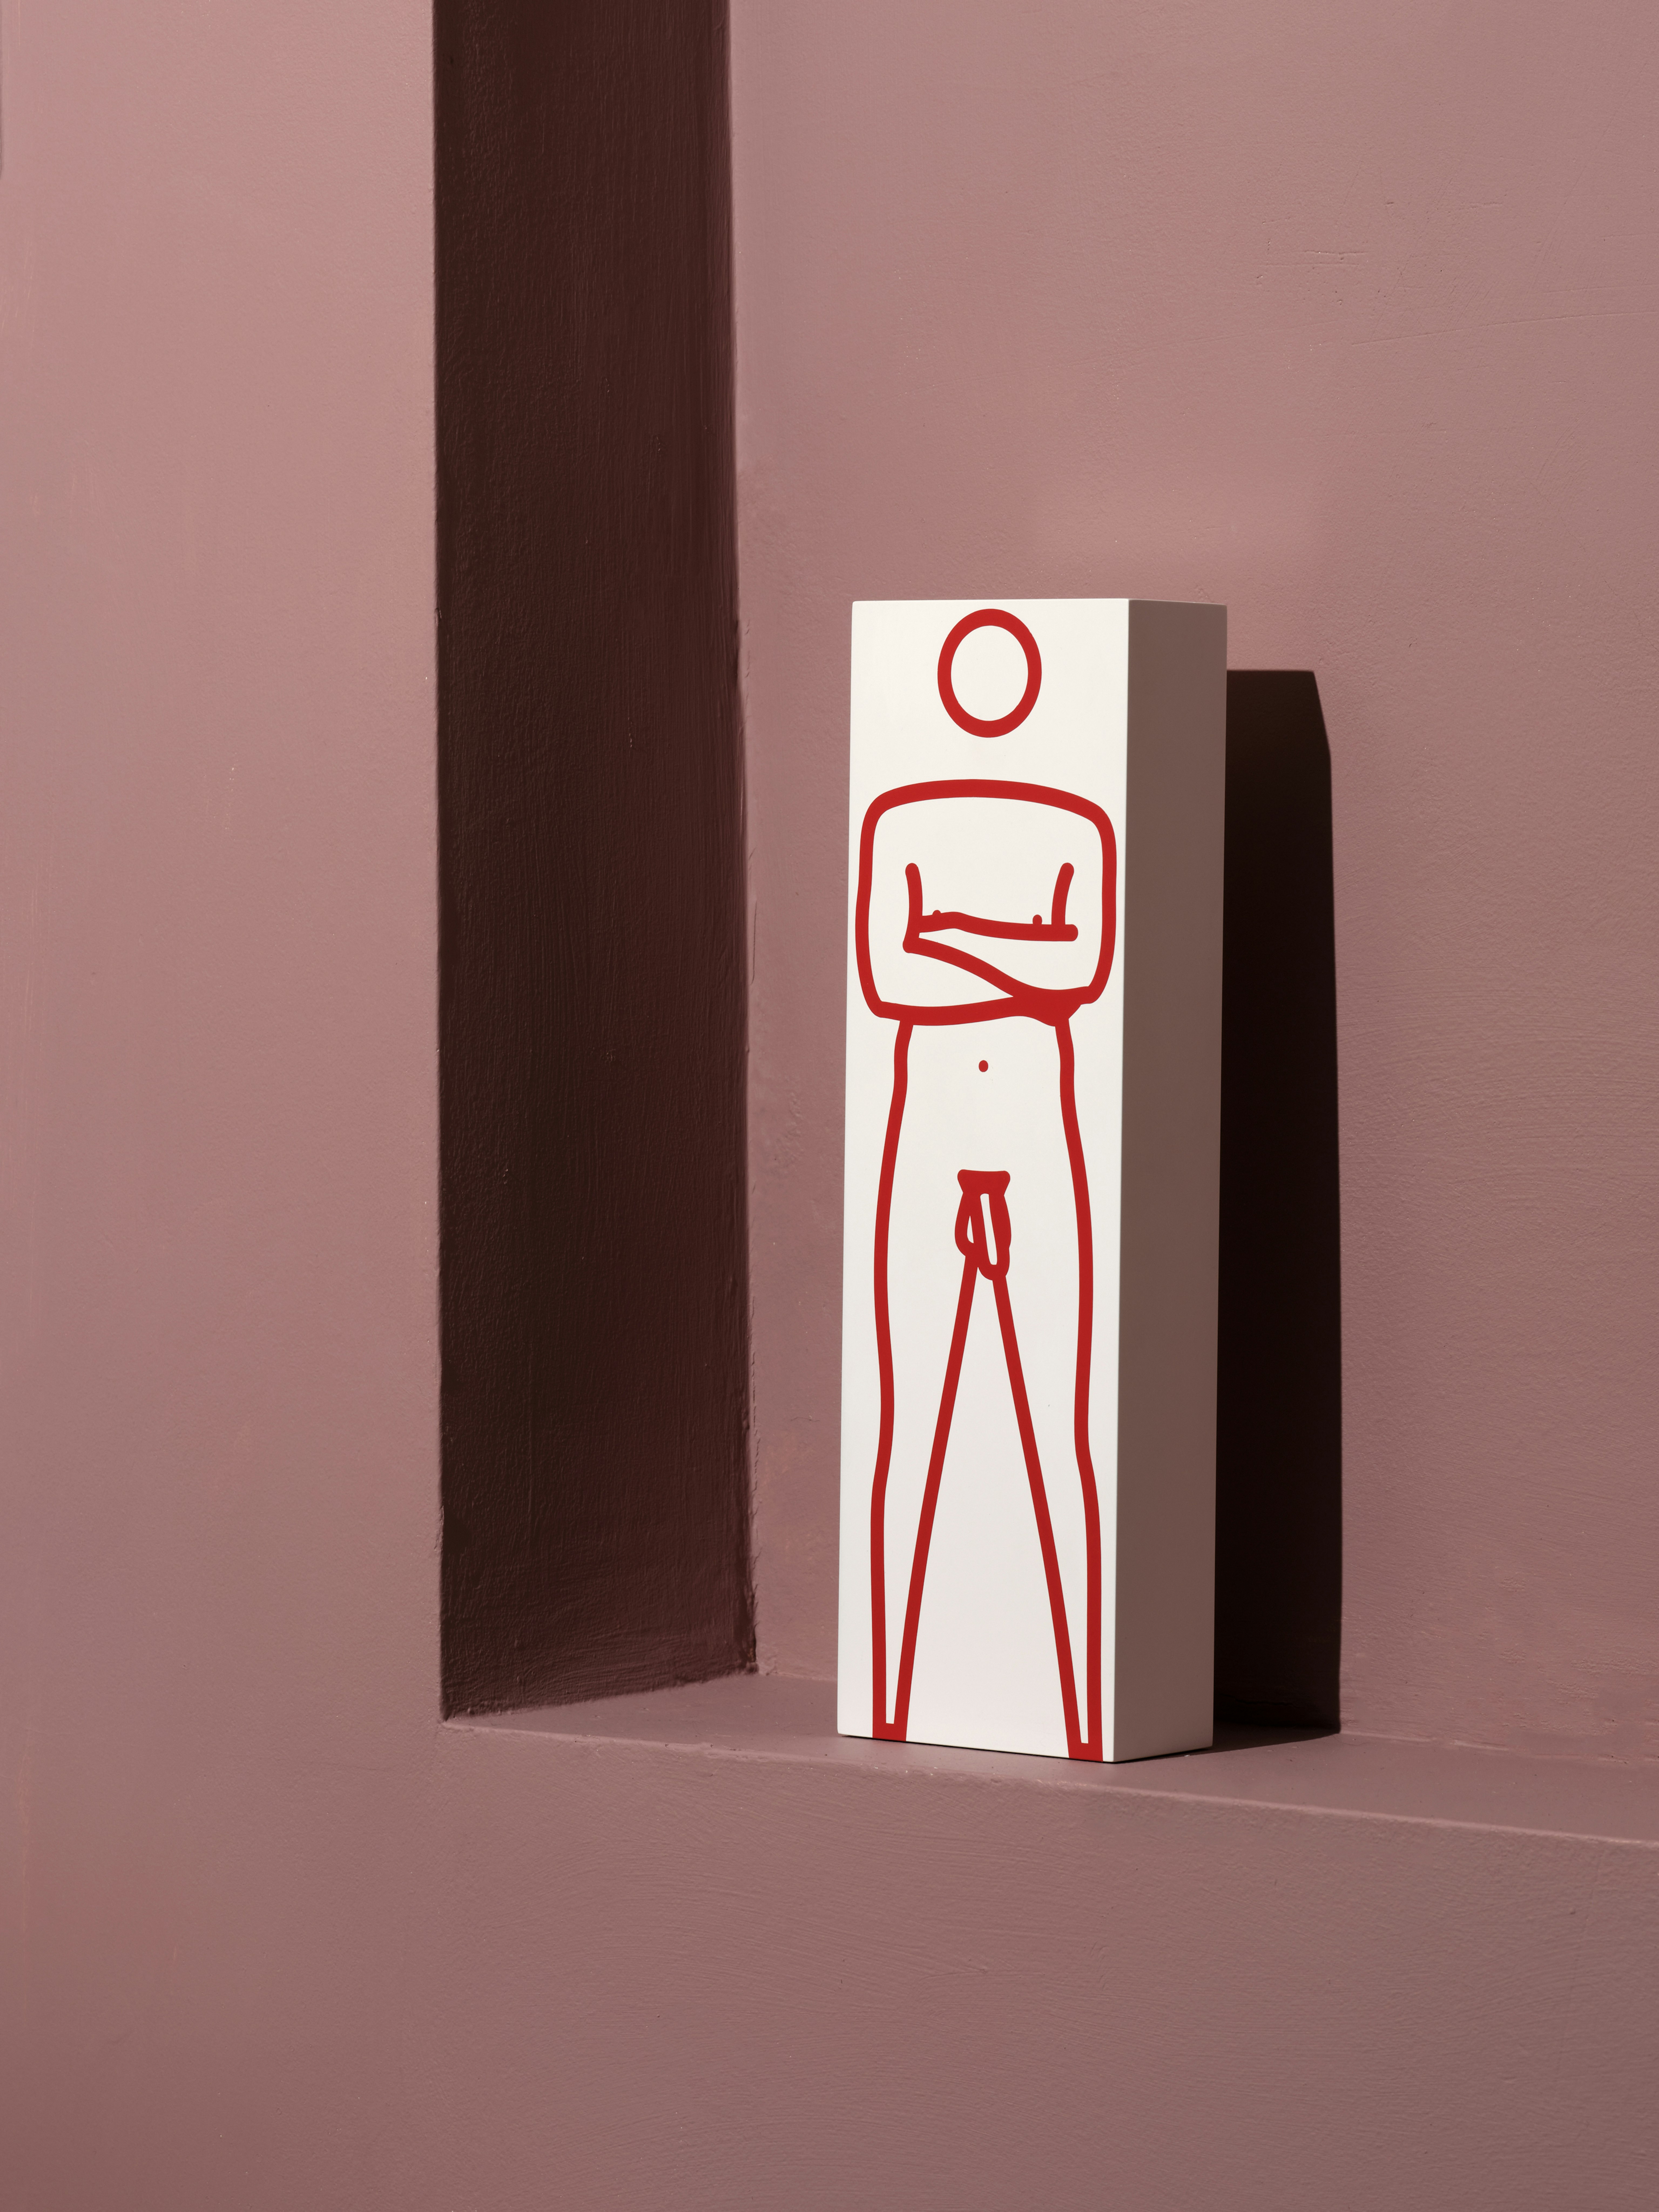 Paint and vinyl on white wood depicting naked man with crossed arms in red